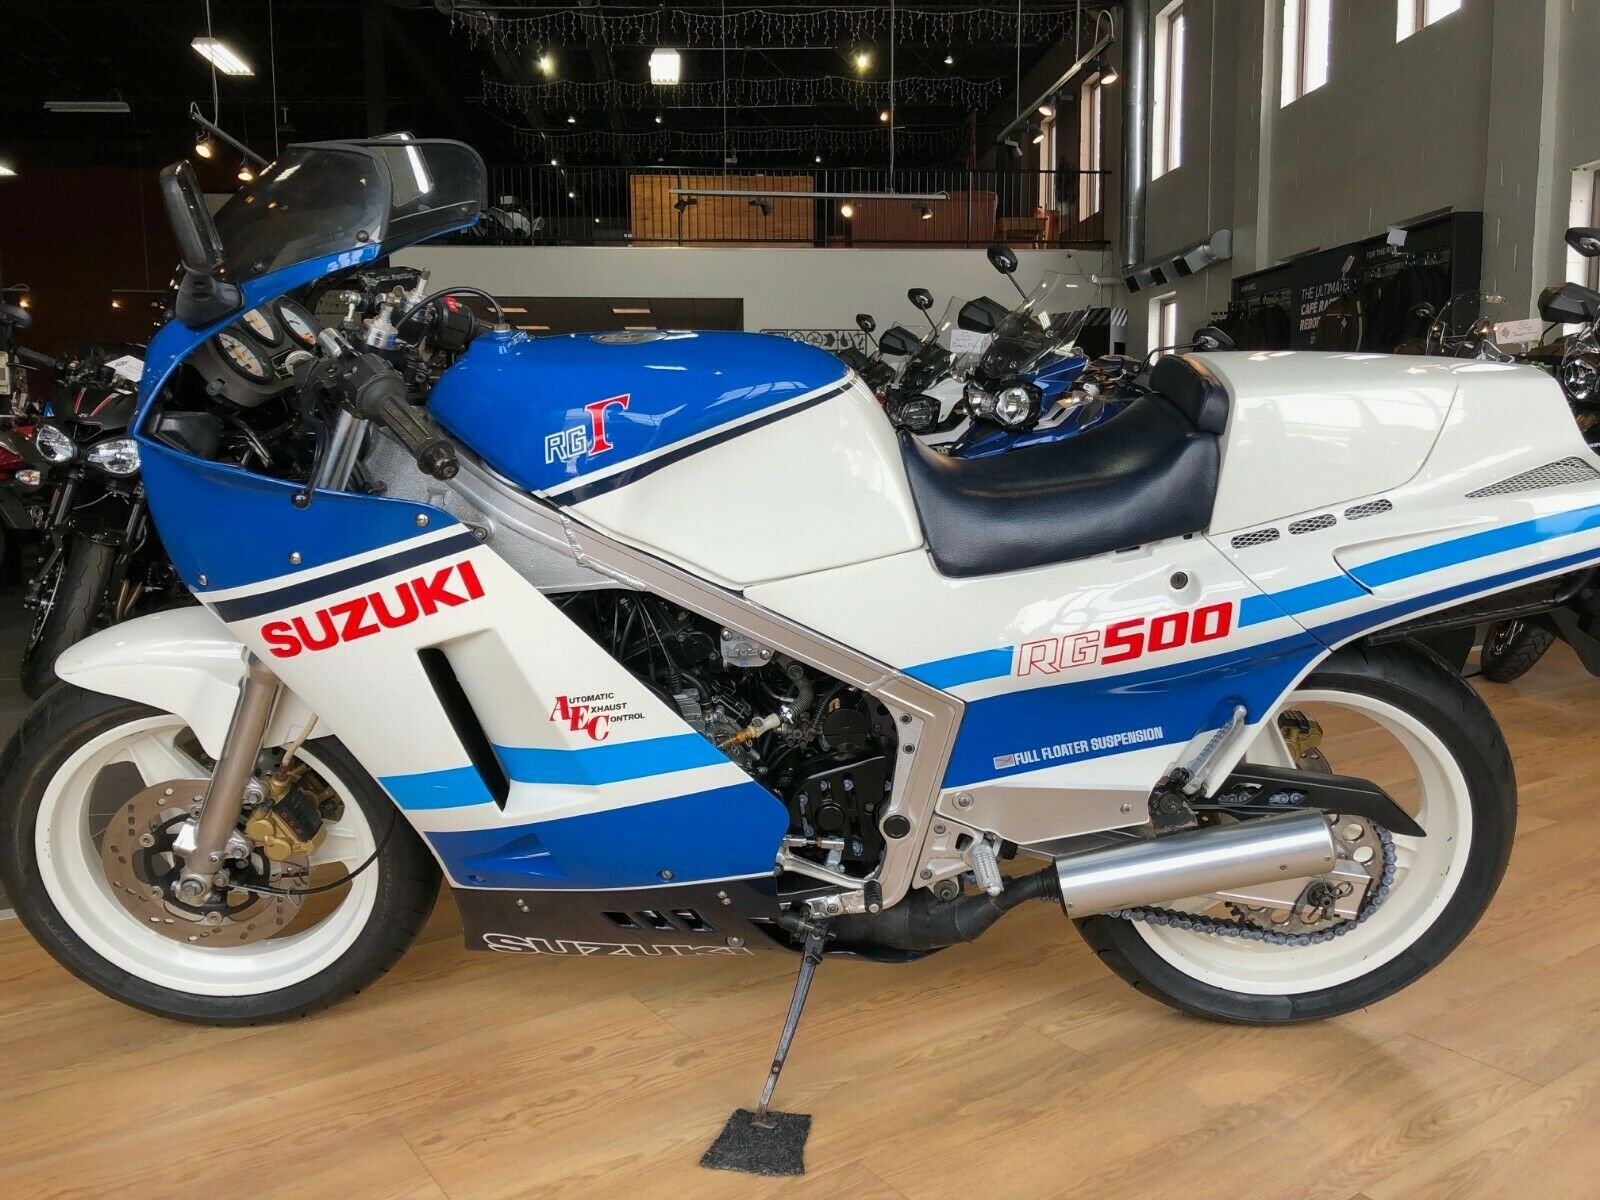 RG500 Archives - Page 2 of 14 - Rare SportBikes For Sale